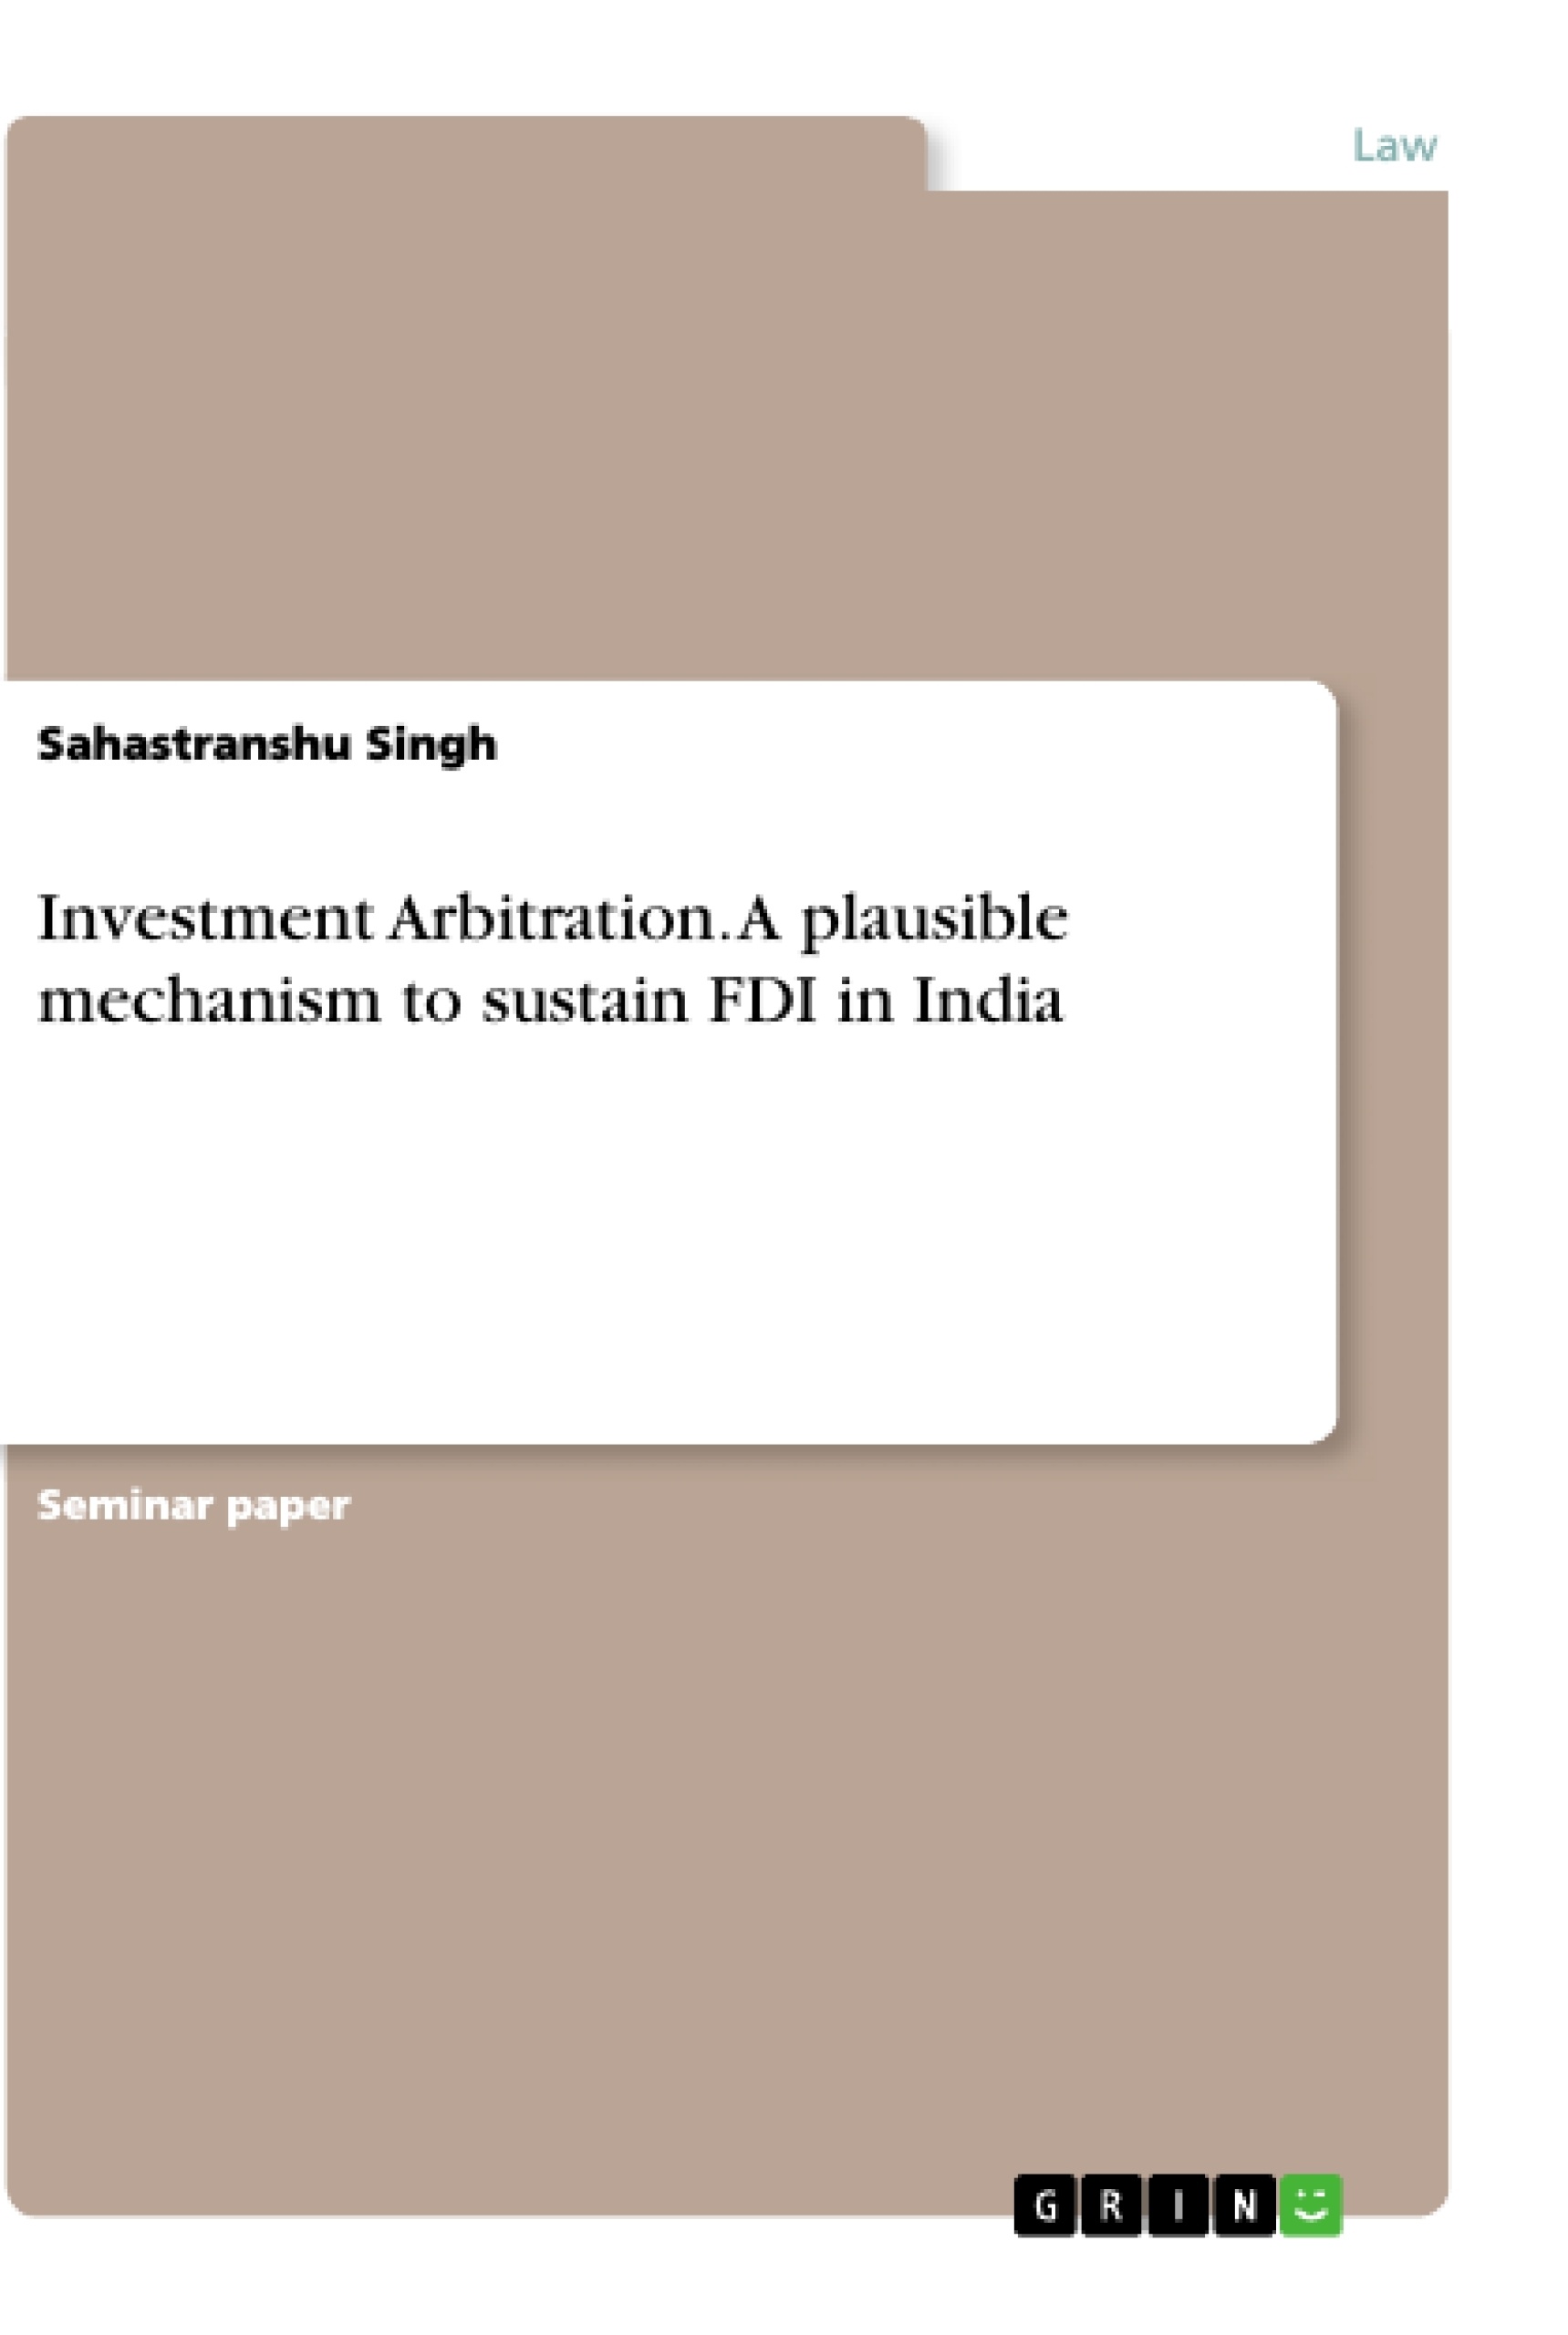 Title: Investment Arbitration. A plausible mechanism to sustain FDI in India